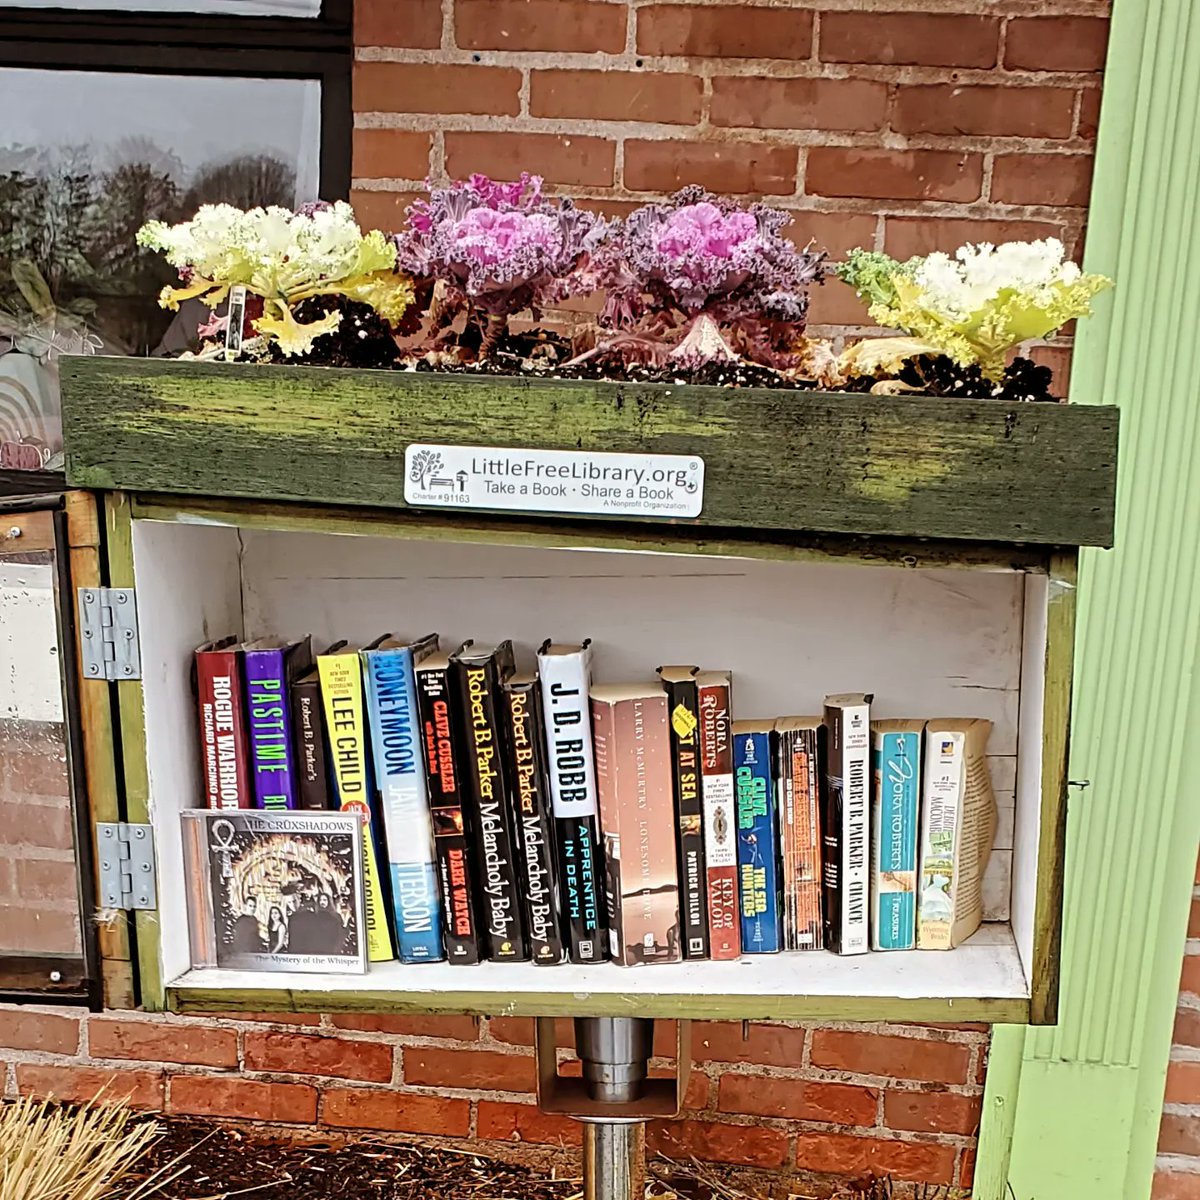 A #littlefreelibrary embellished with decorative cabbage!

#takeoneleaveone
#lfl❤️ #bookcougarsontheprowl
#bookcougars #booksbooksbooks

@LittleFreeLibra